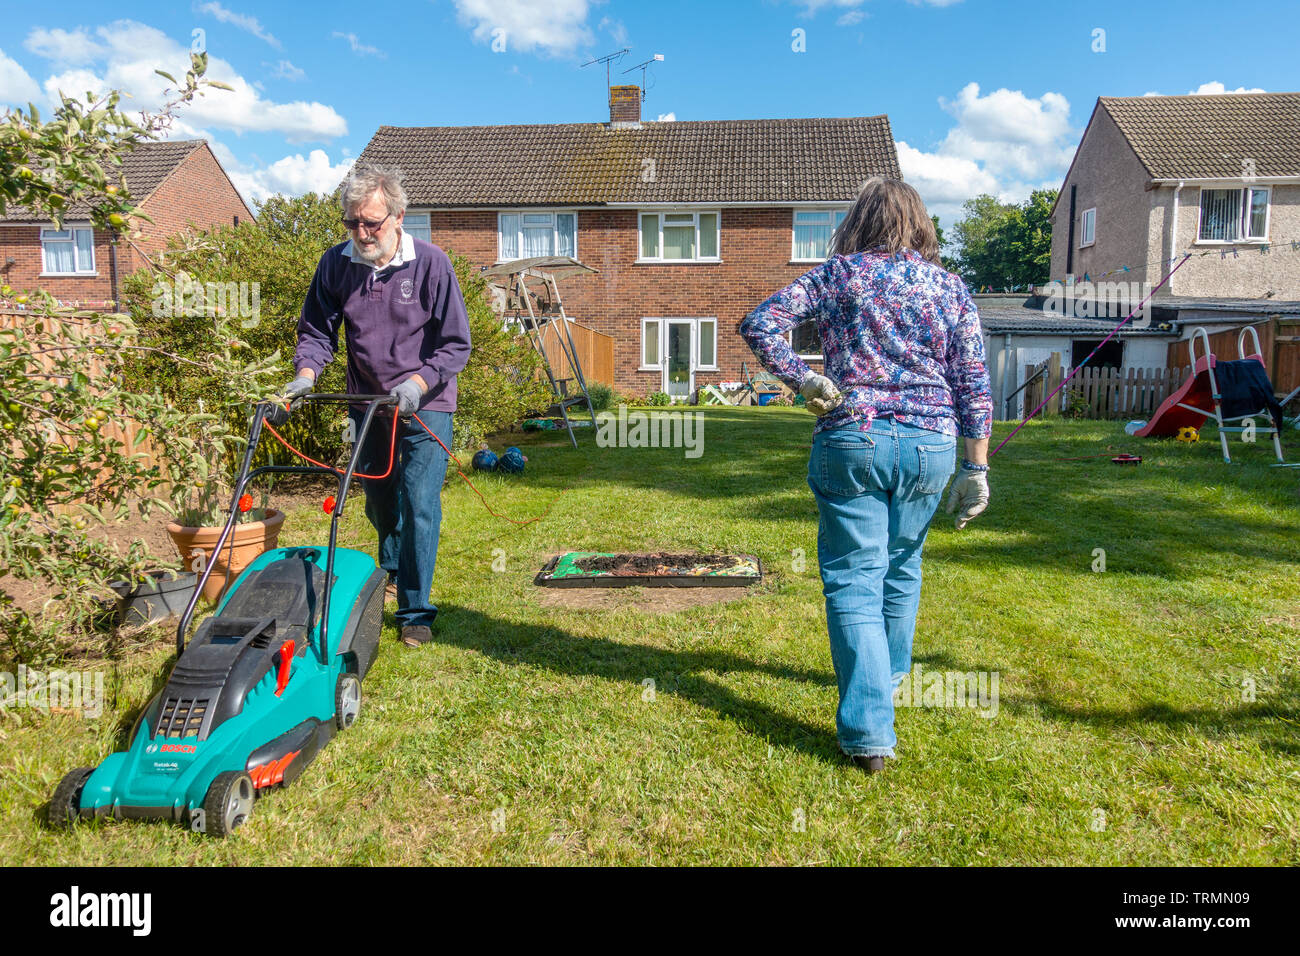 A retired couple doing gardening in a residential back garden on a sunny day with blue sky. The man mows the lawn with an electric lawnmower. Stock Photo